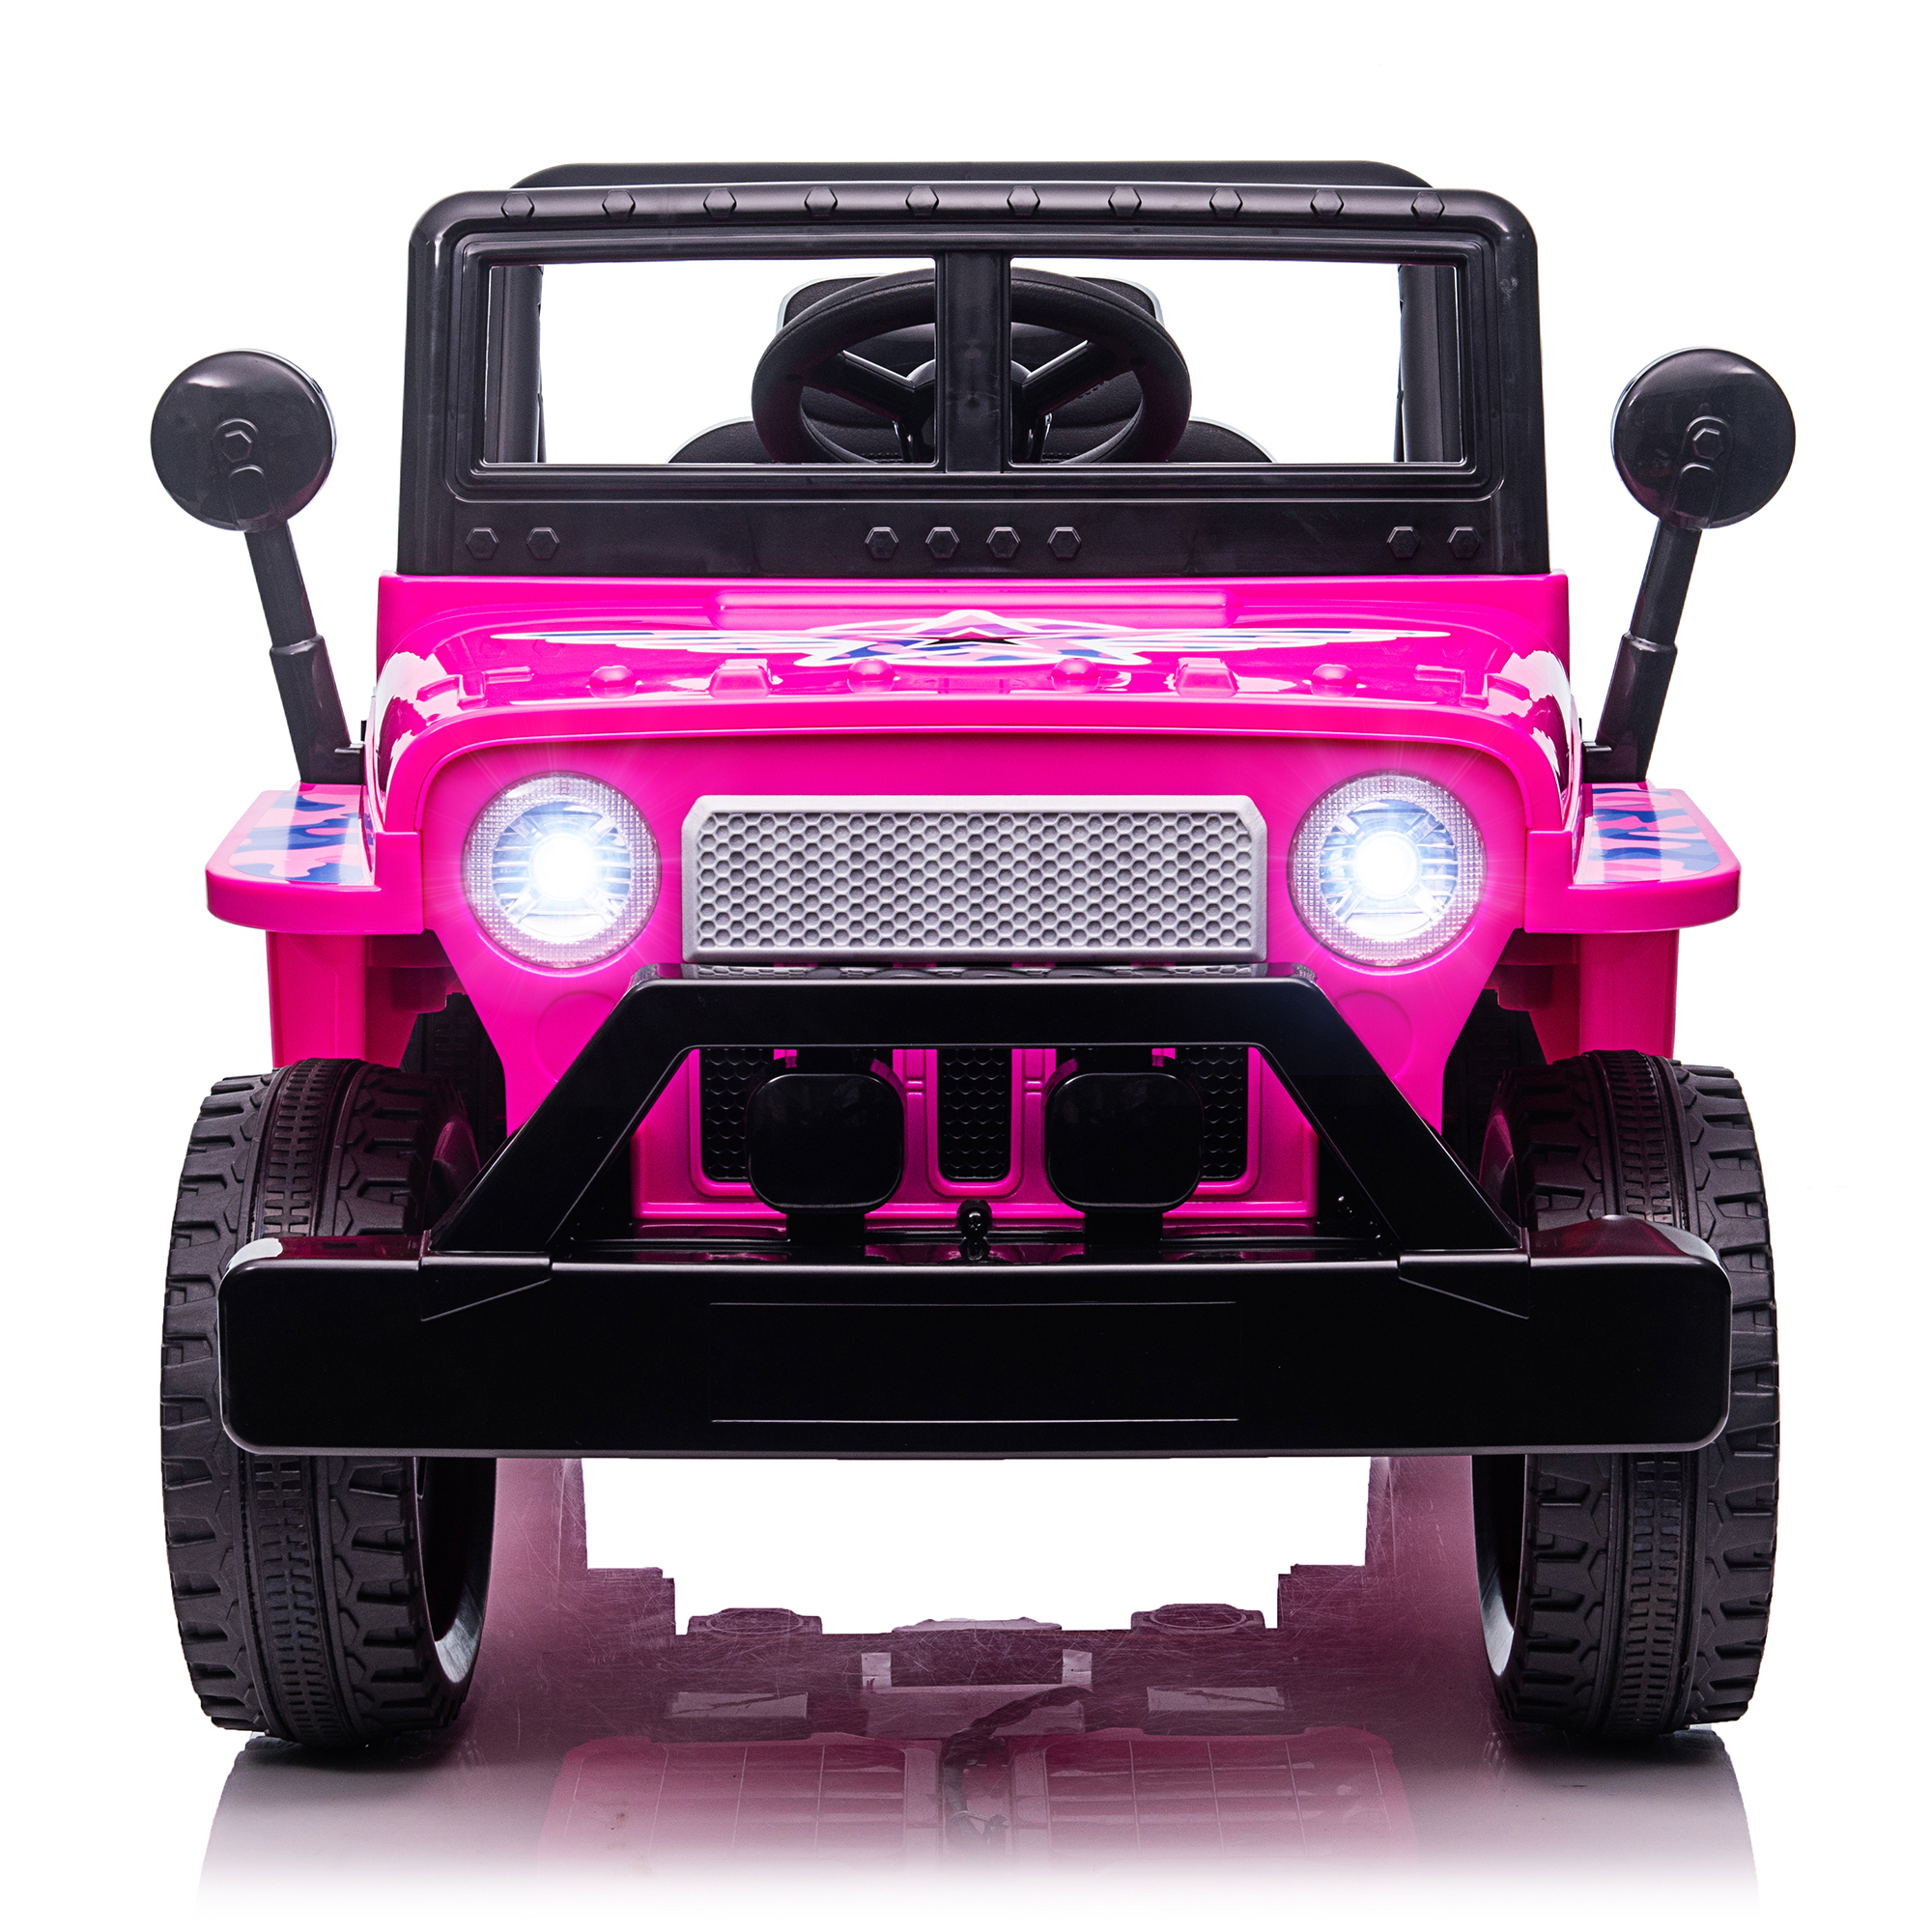 Customized 12V Kids Ride On Truck Car, Power Wheels with LED Lights Horn Openable Doors, Electric Vehicle Toy for 3-6 Ages,Pink-CASAINC